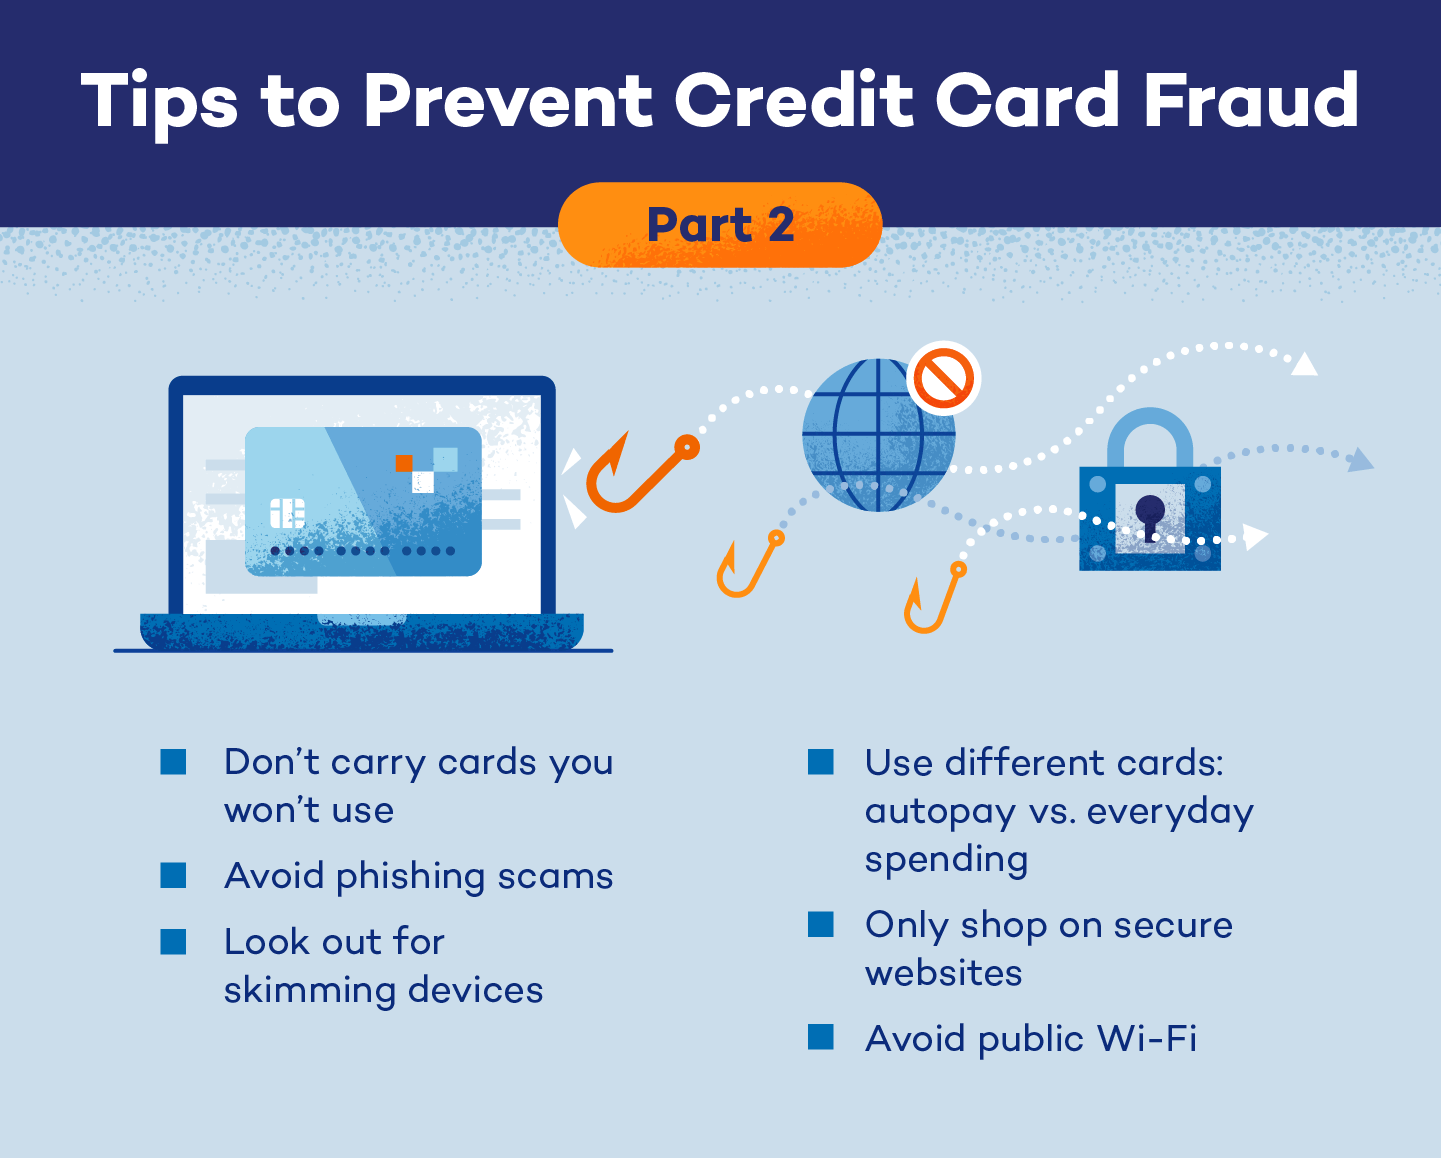 Avoiding phishing scams is one way to prevent credit card fraud.